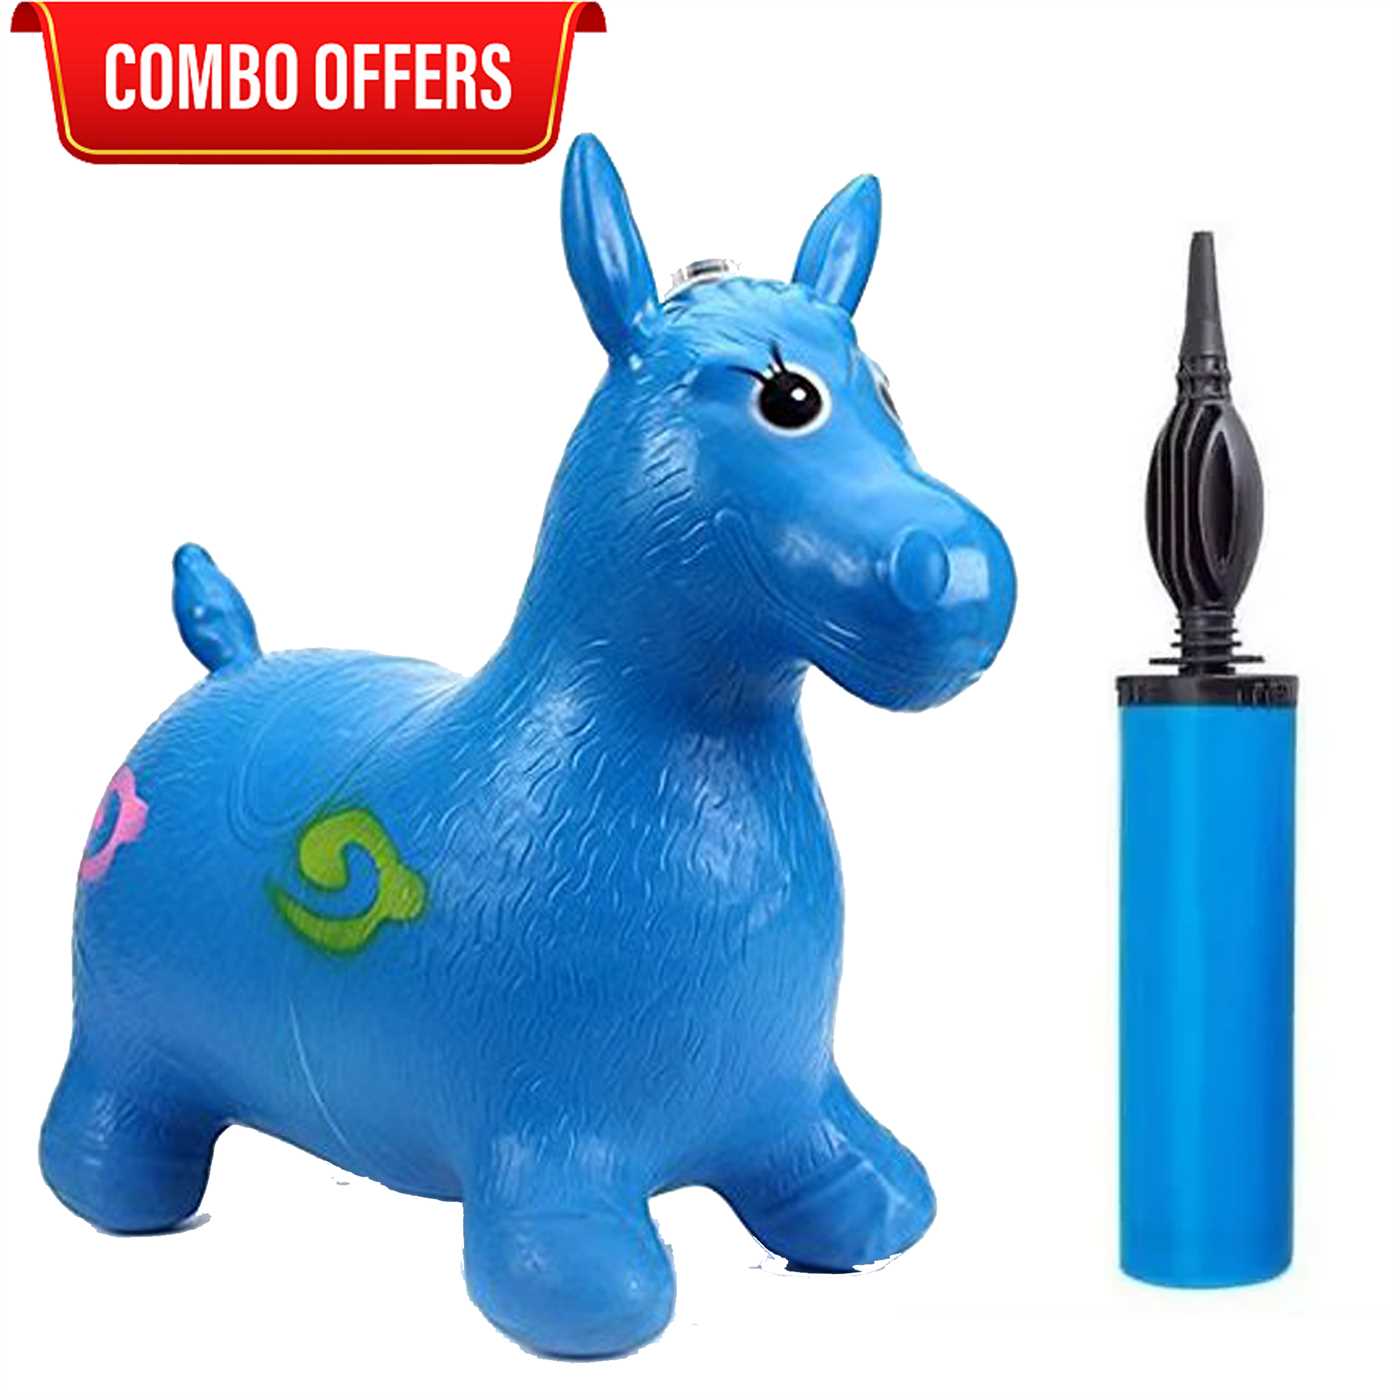 Buy Combo Offer Of Air Pump And Inflatable Space Hopper, Jumping Horse,  Ride-on Bouncy Animal, Horse For Baby in Nepal at 